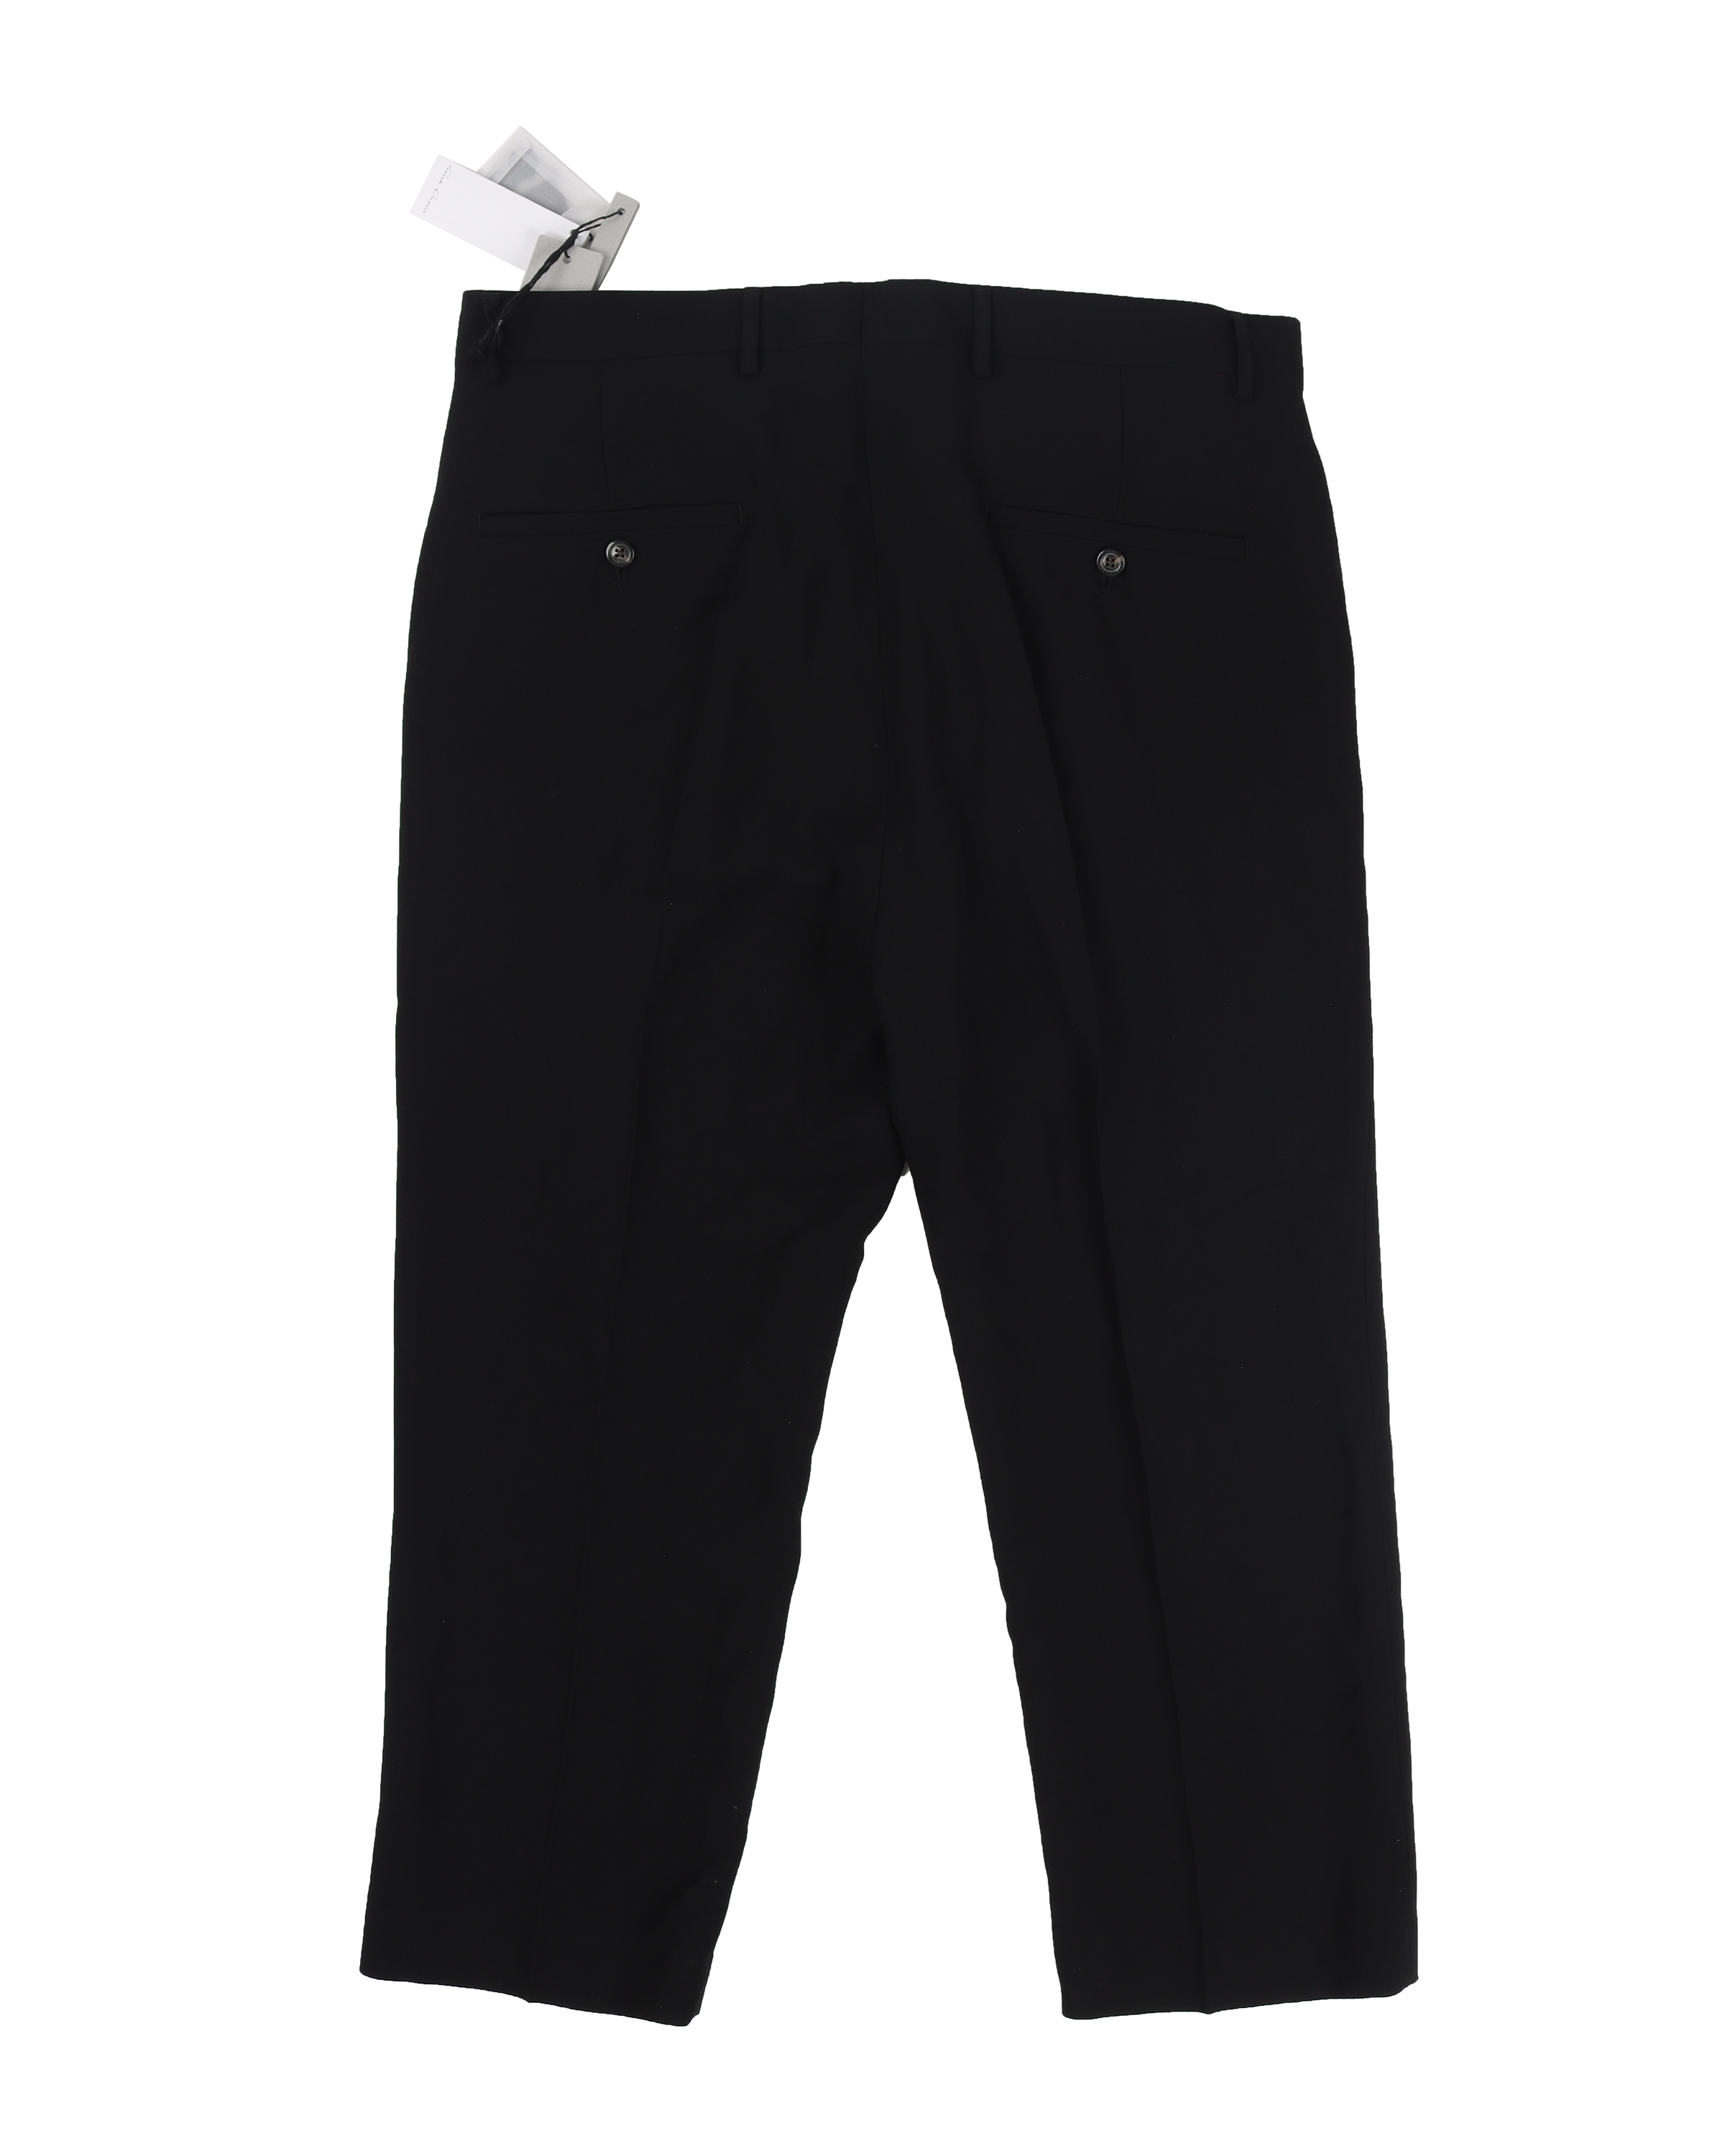 FW20 Slim Astaires Cropped Pant